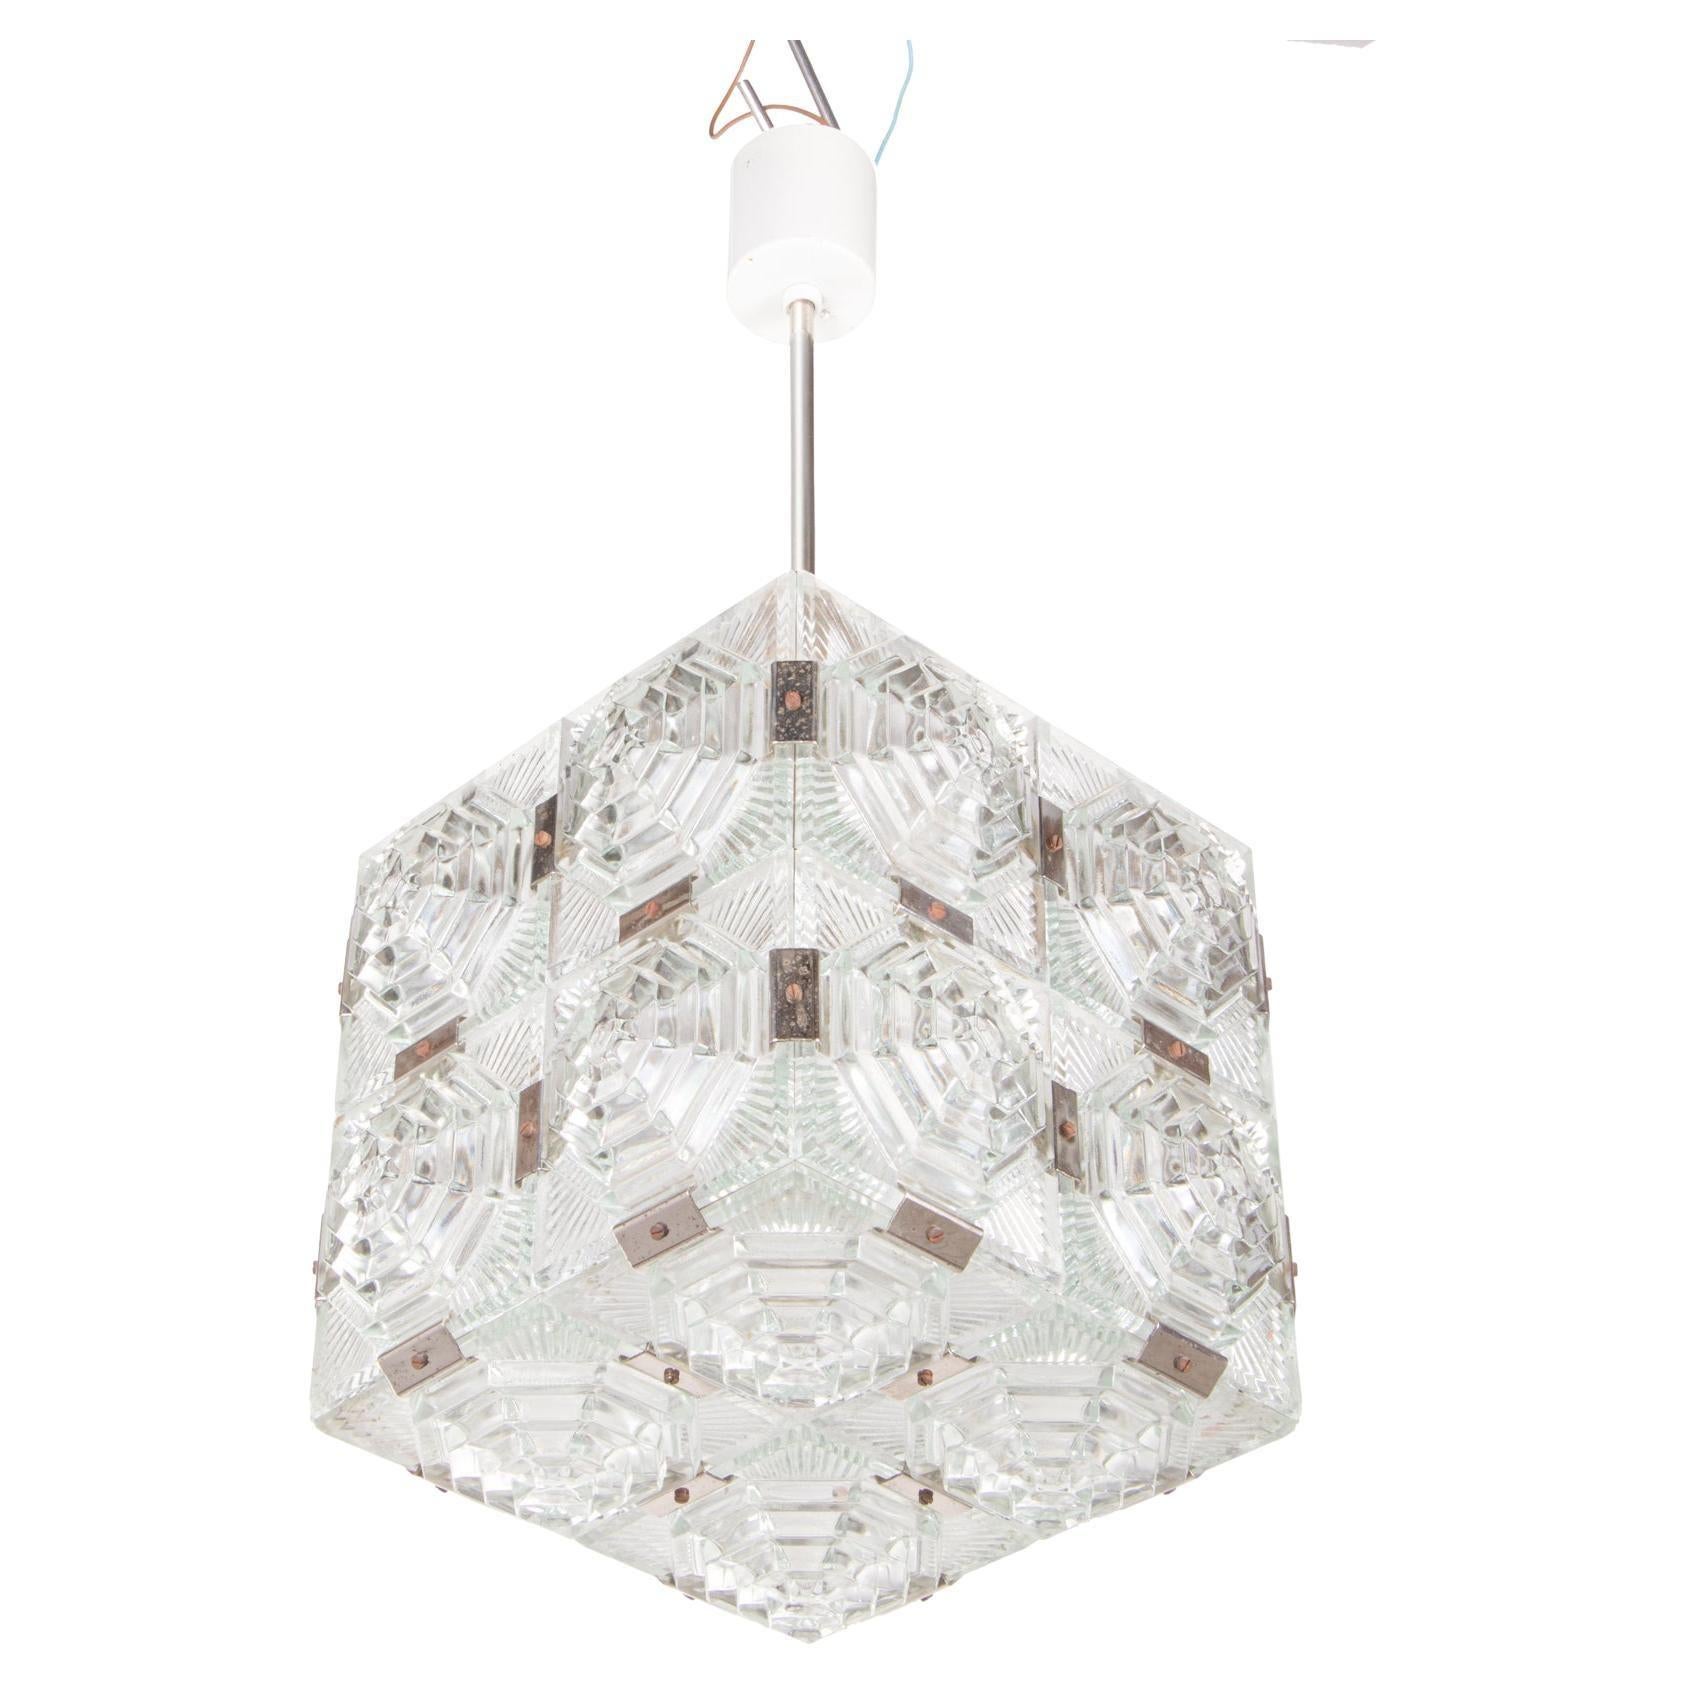 Beautiful Bohemian cubist ceiling lamp composed of thick textured glass elements with chromed fittings. Manufactured by by Kamenický Šenov, Czechoslovakia in the 1960s. 
 
Style: mid century, modernist. 
Colors: transparent, silver and white.